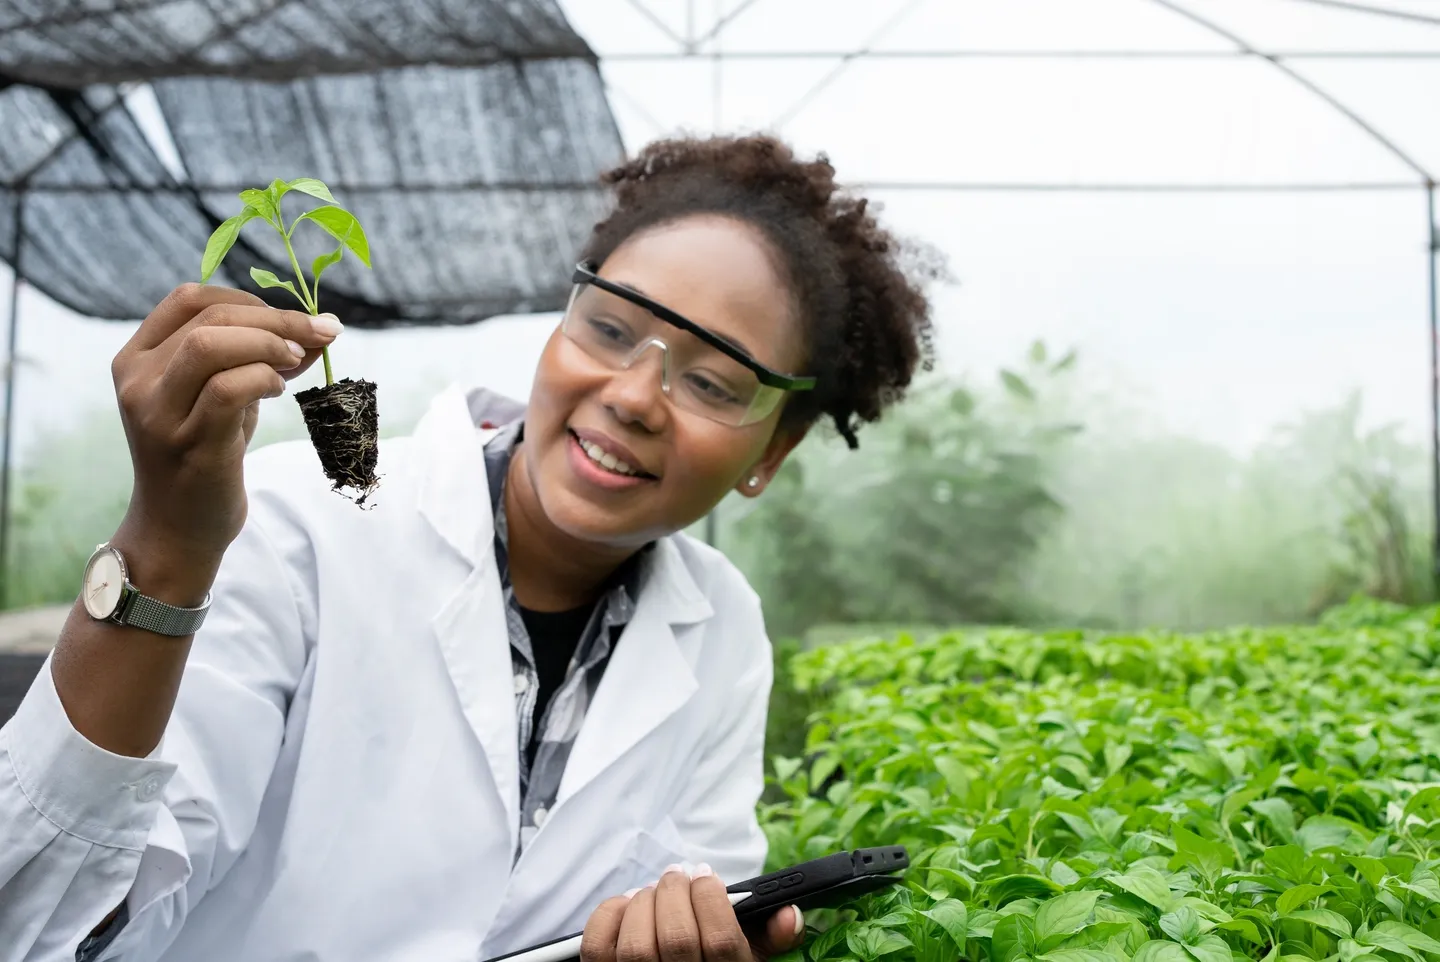 A woman holding a plant and using a cell phone.